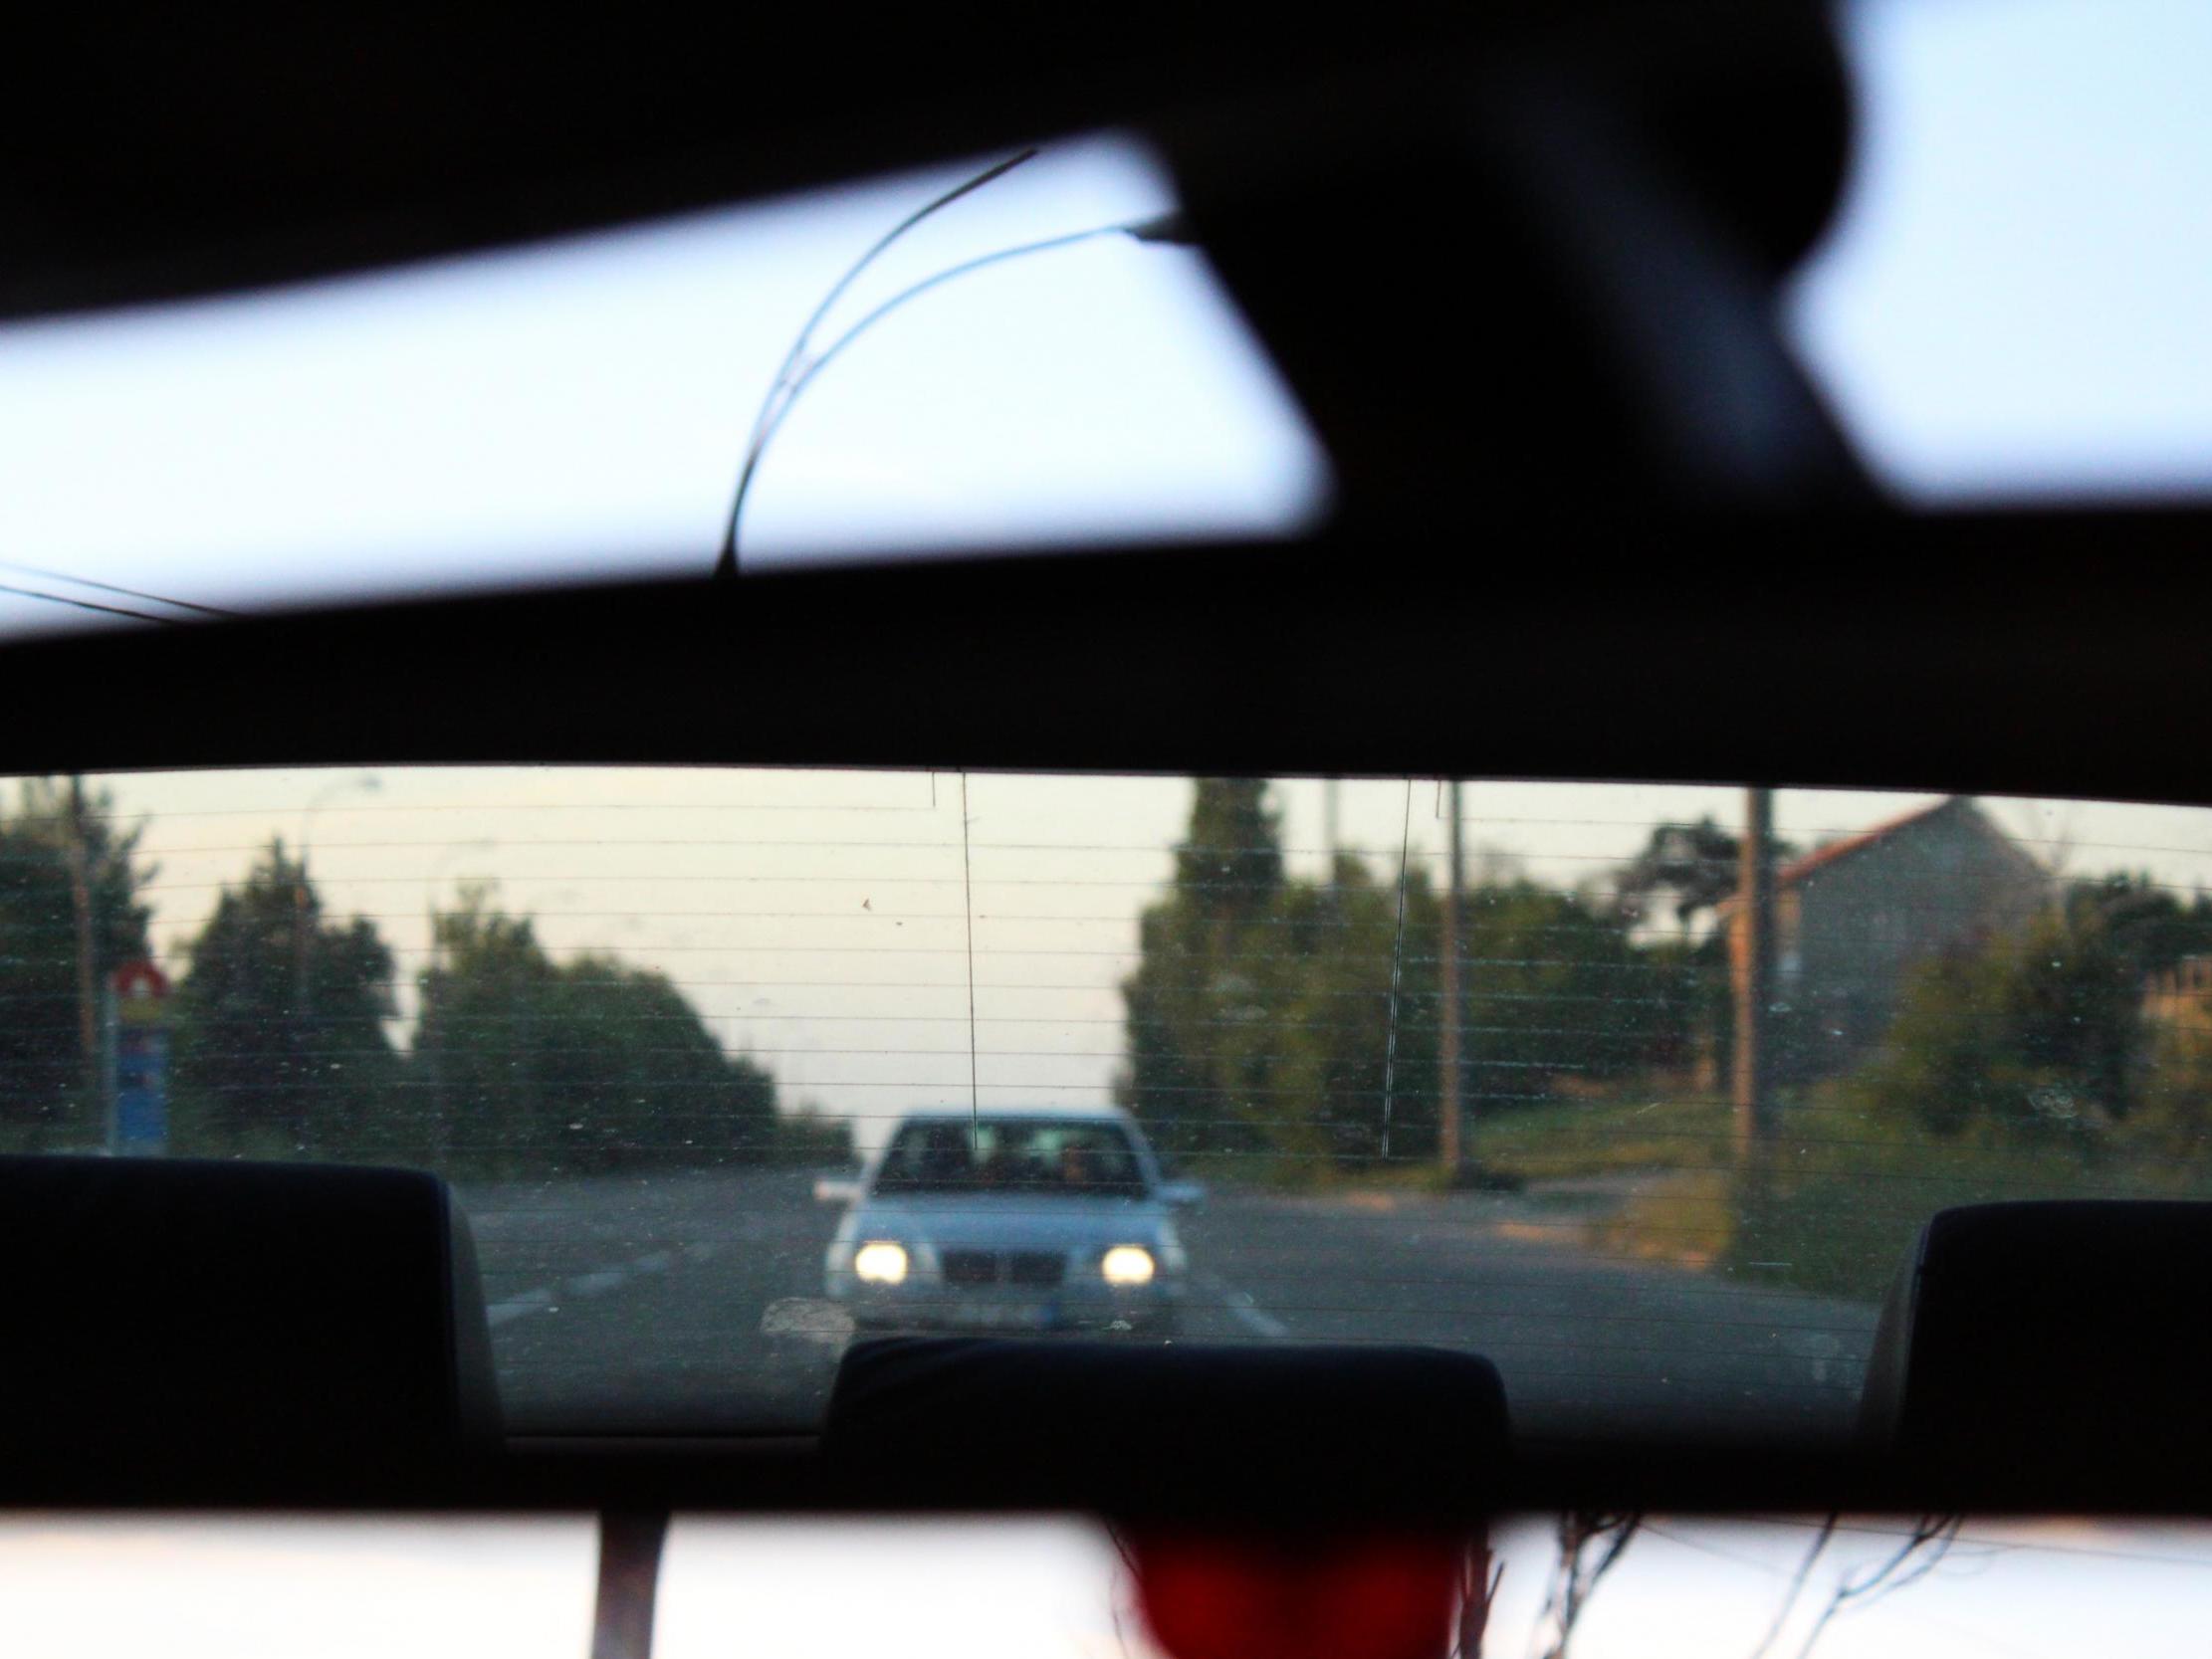 File image of car in rear view mirror.